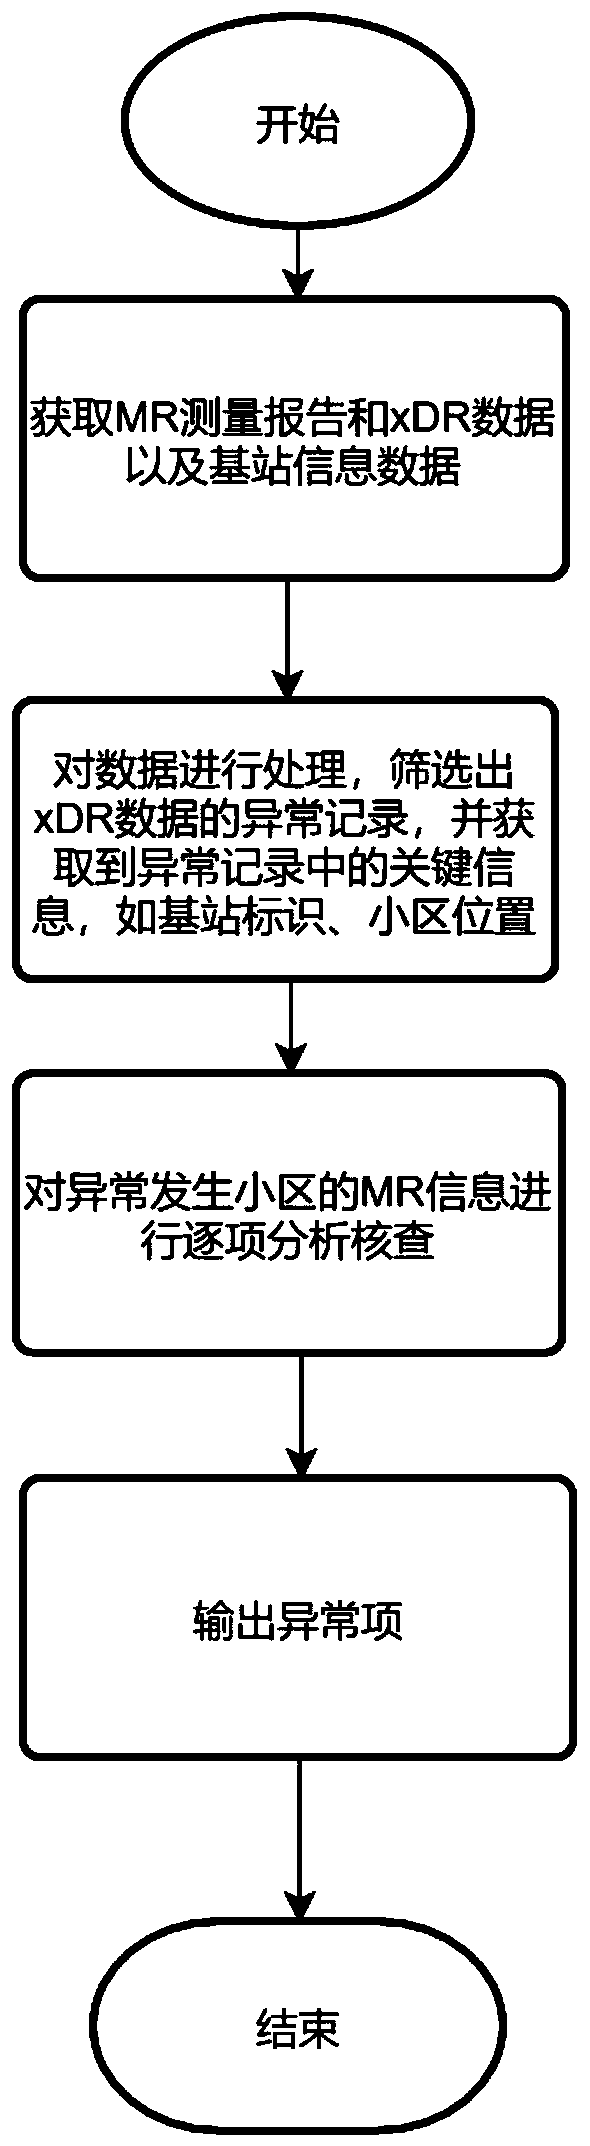 Wireless network index analysis method and system based on MR and xDR